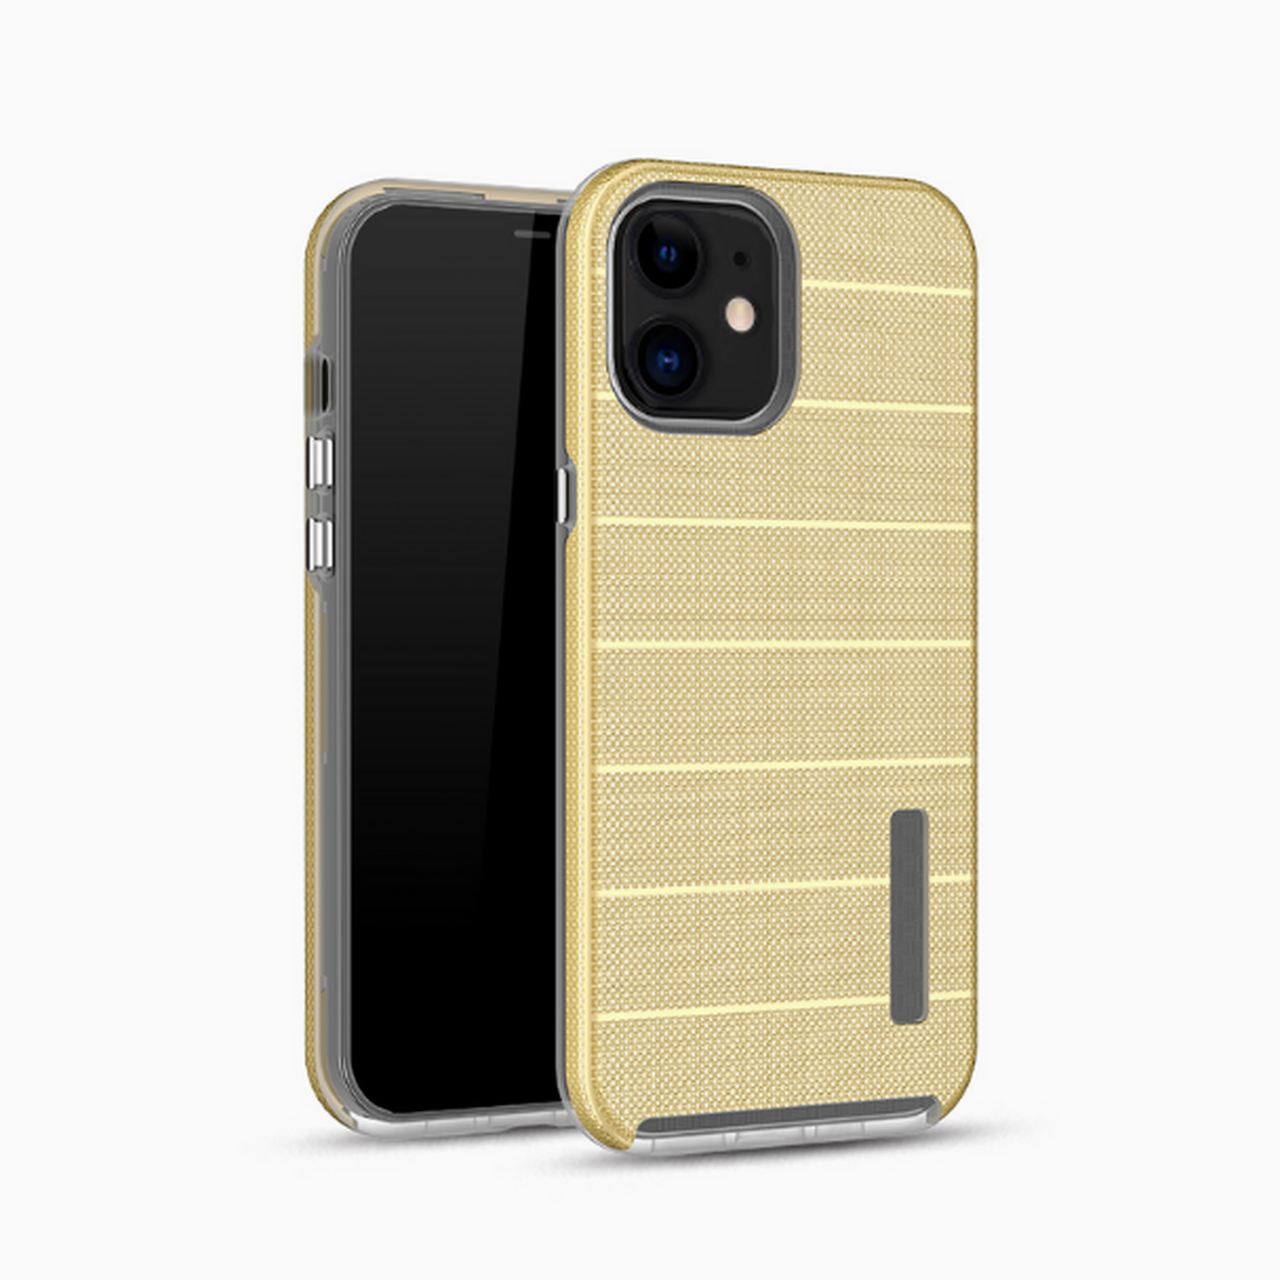 Caseology Hard Shell Fashion Case for iPhone 12